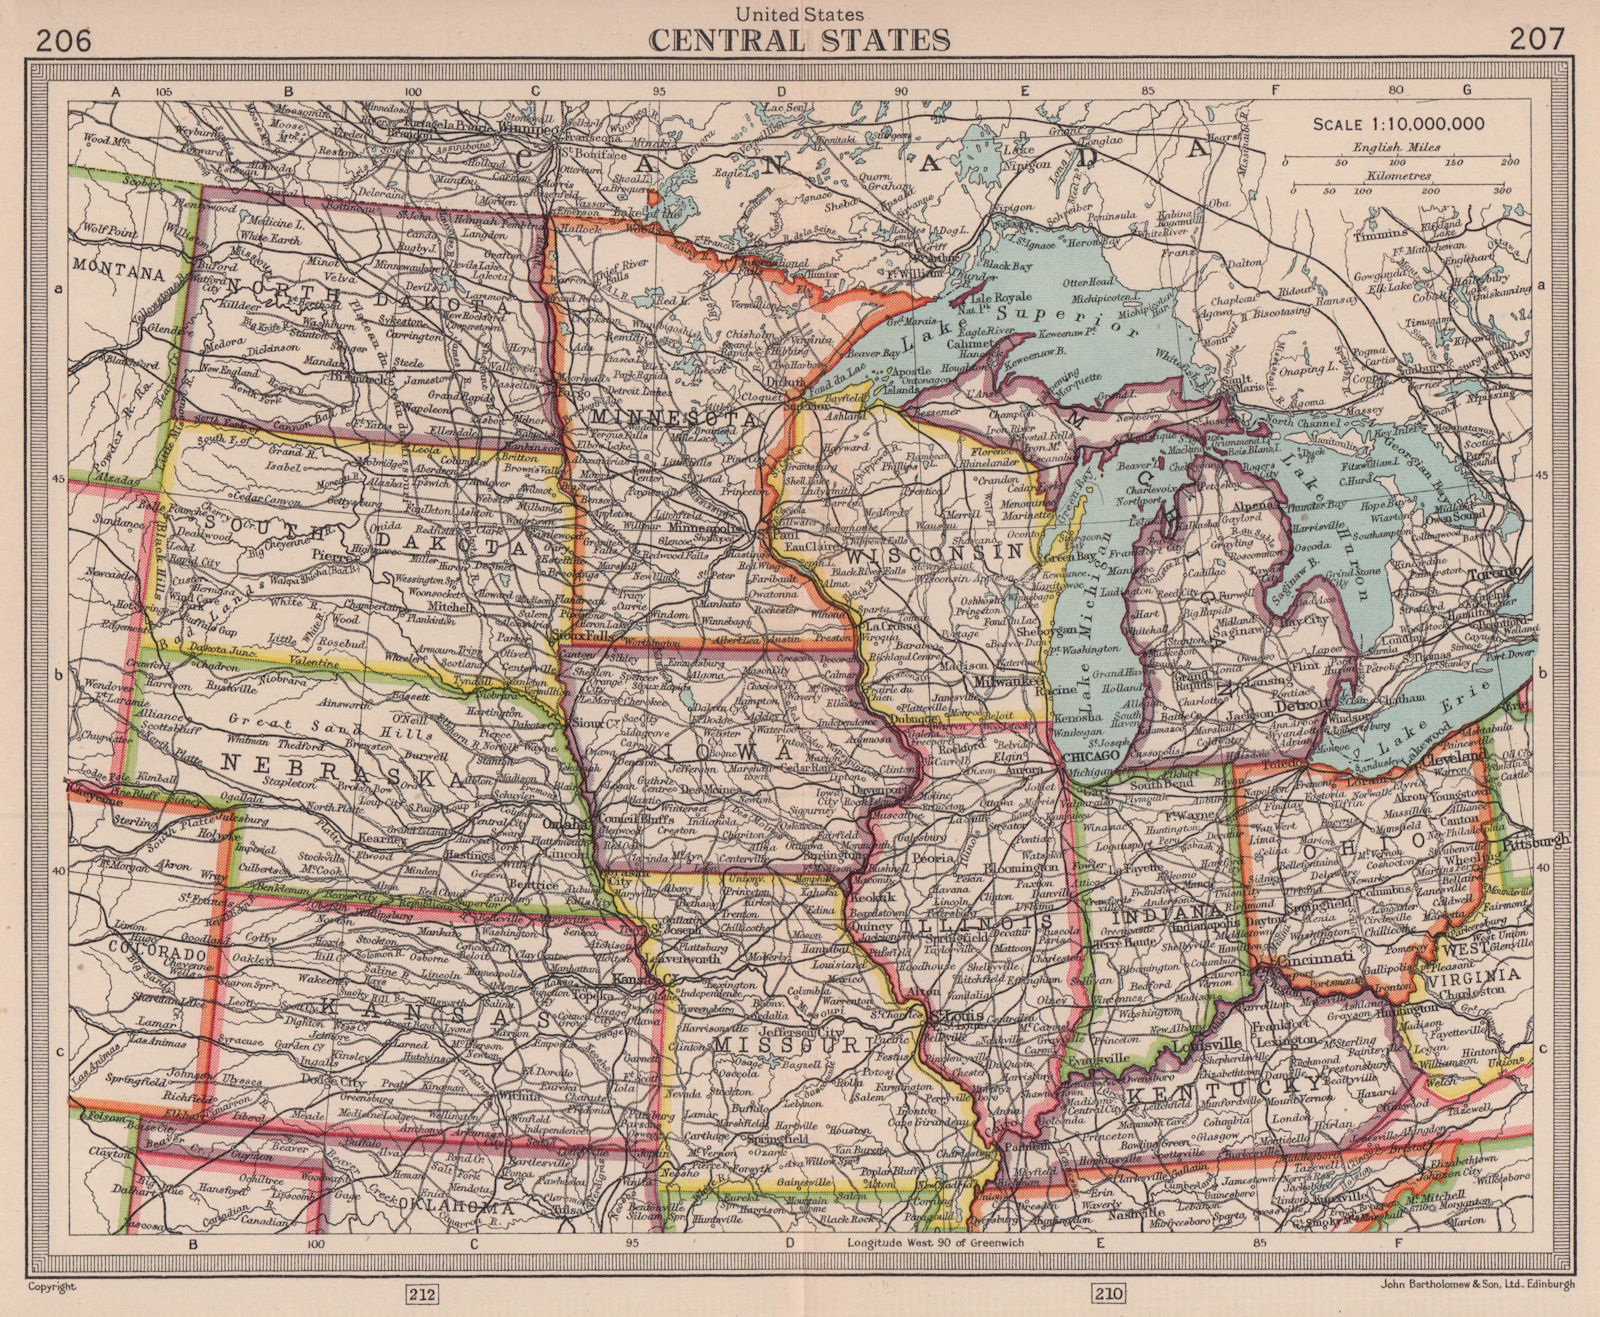 Associate Product United States Central states. Midwestern USA. BARTHOLOMEW 1949 old vintage map